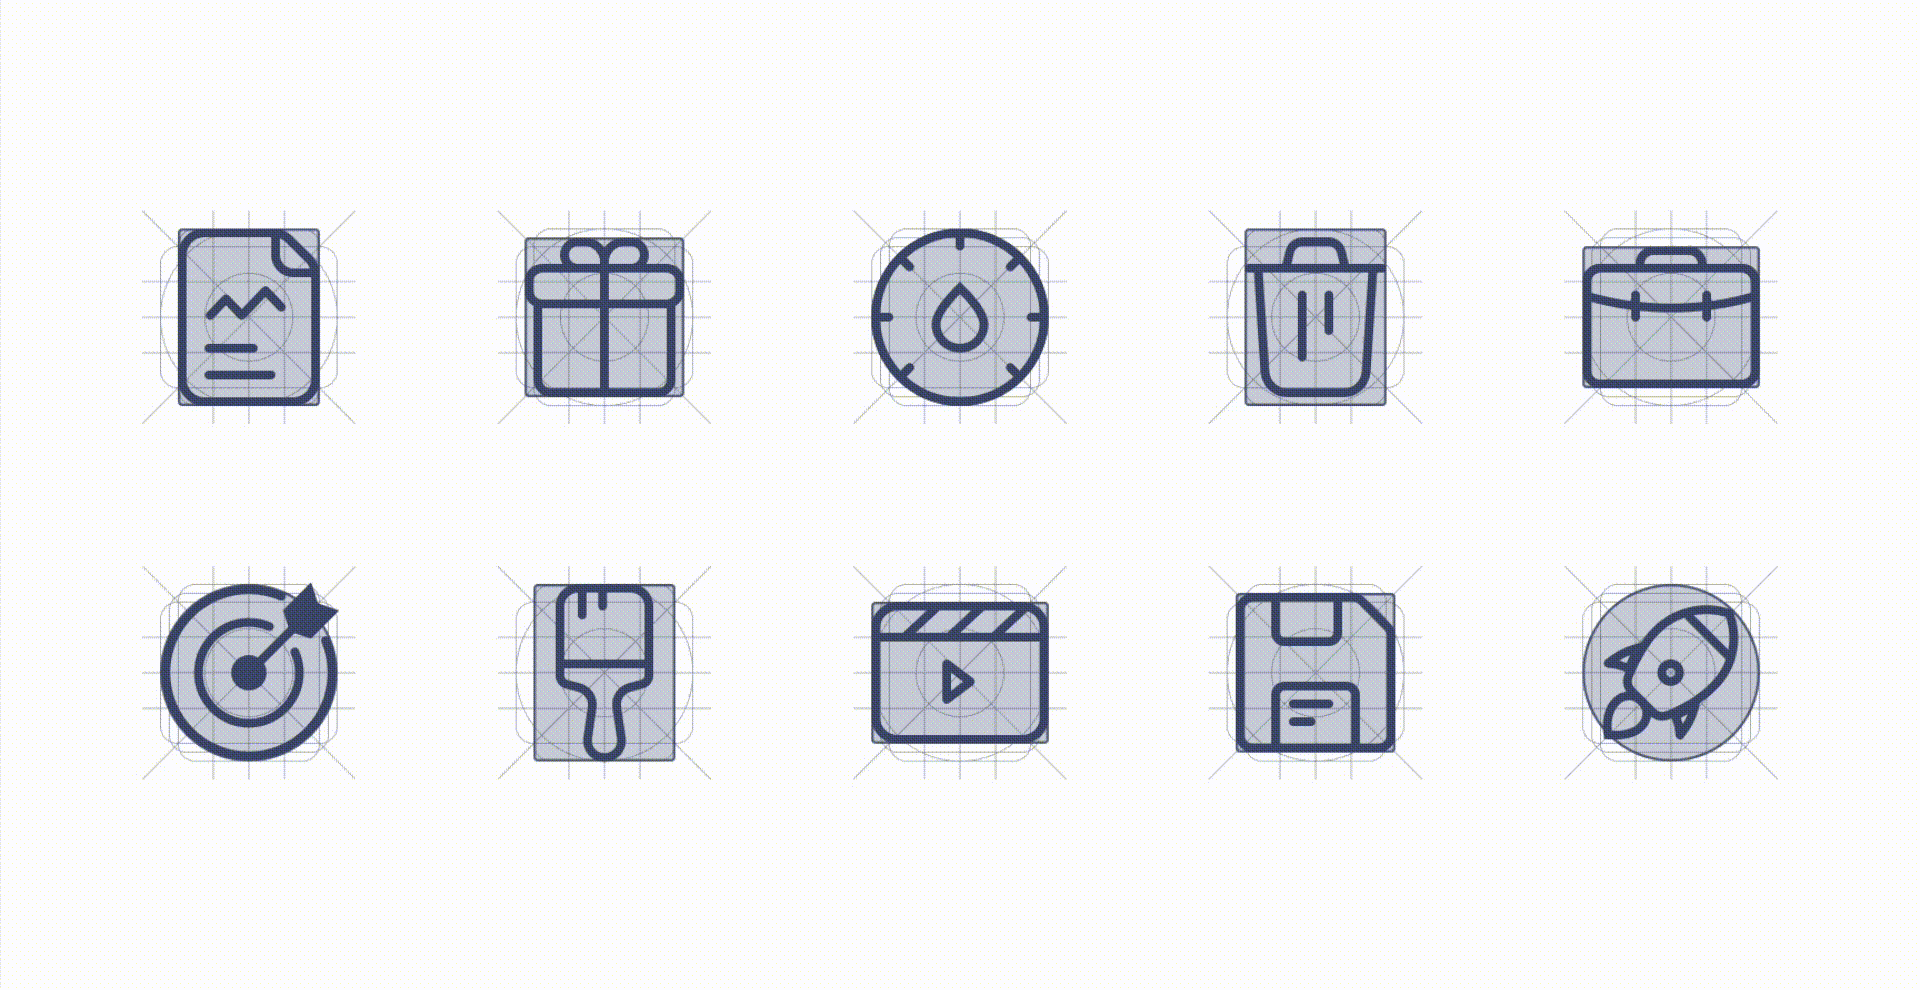 A GIF that shows how a set of icons allgined on the icon grid